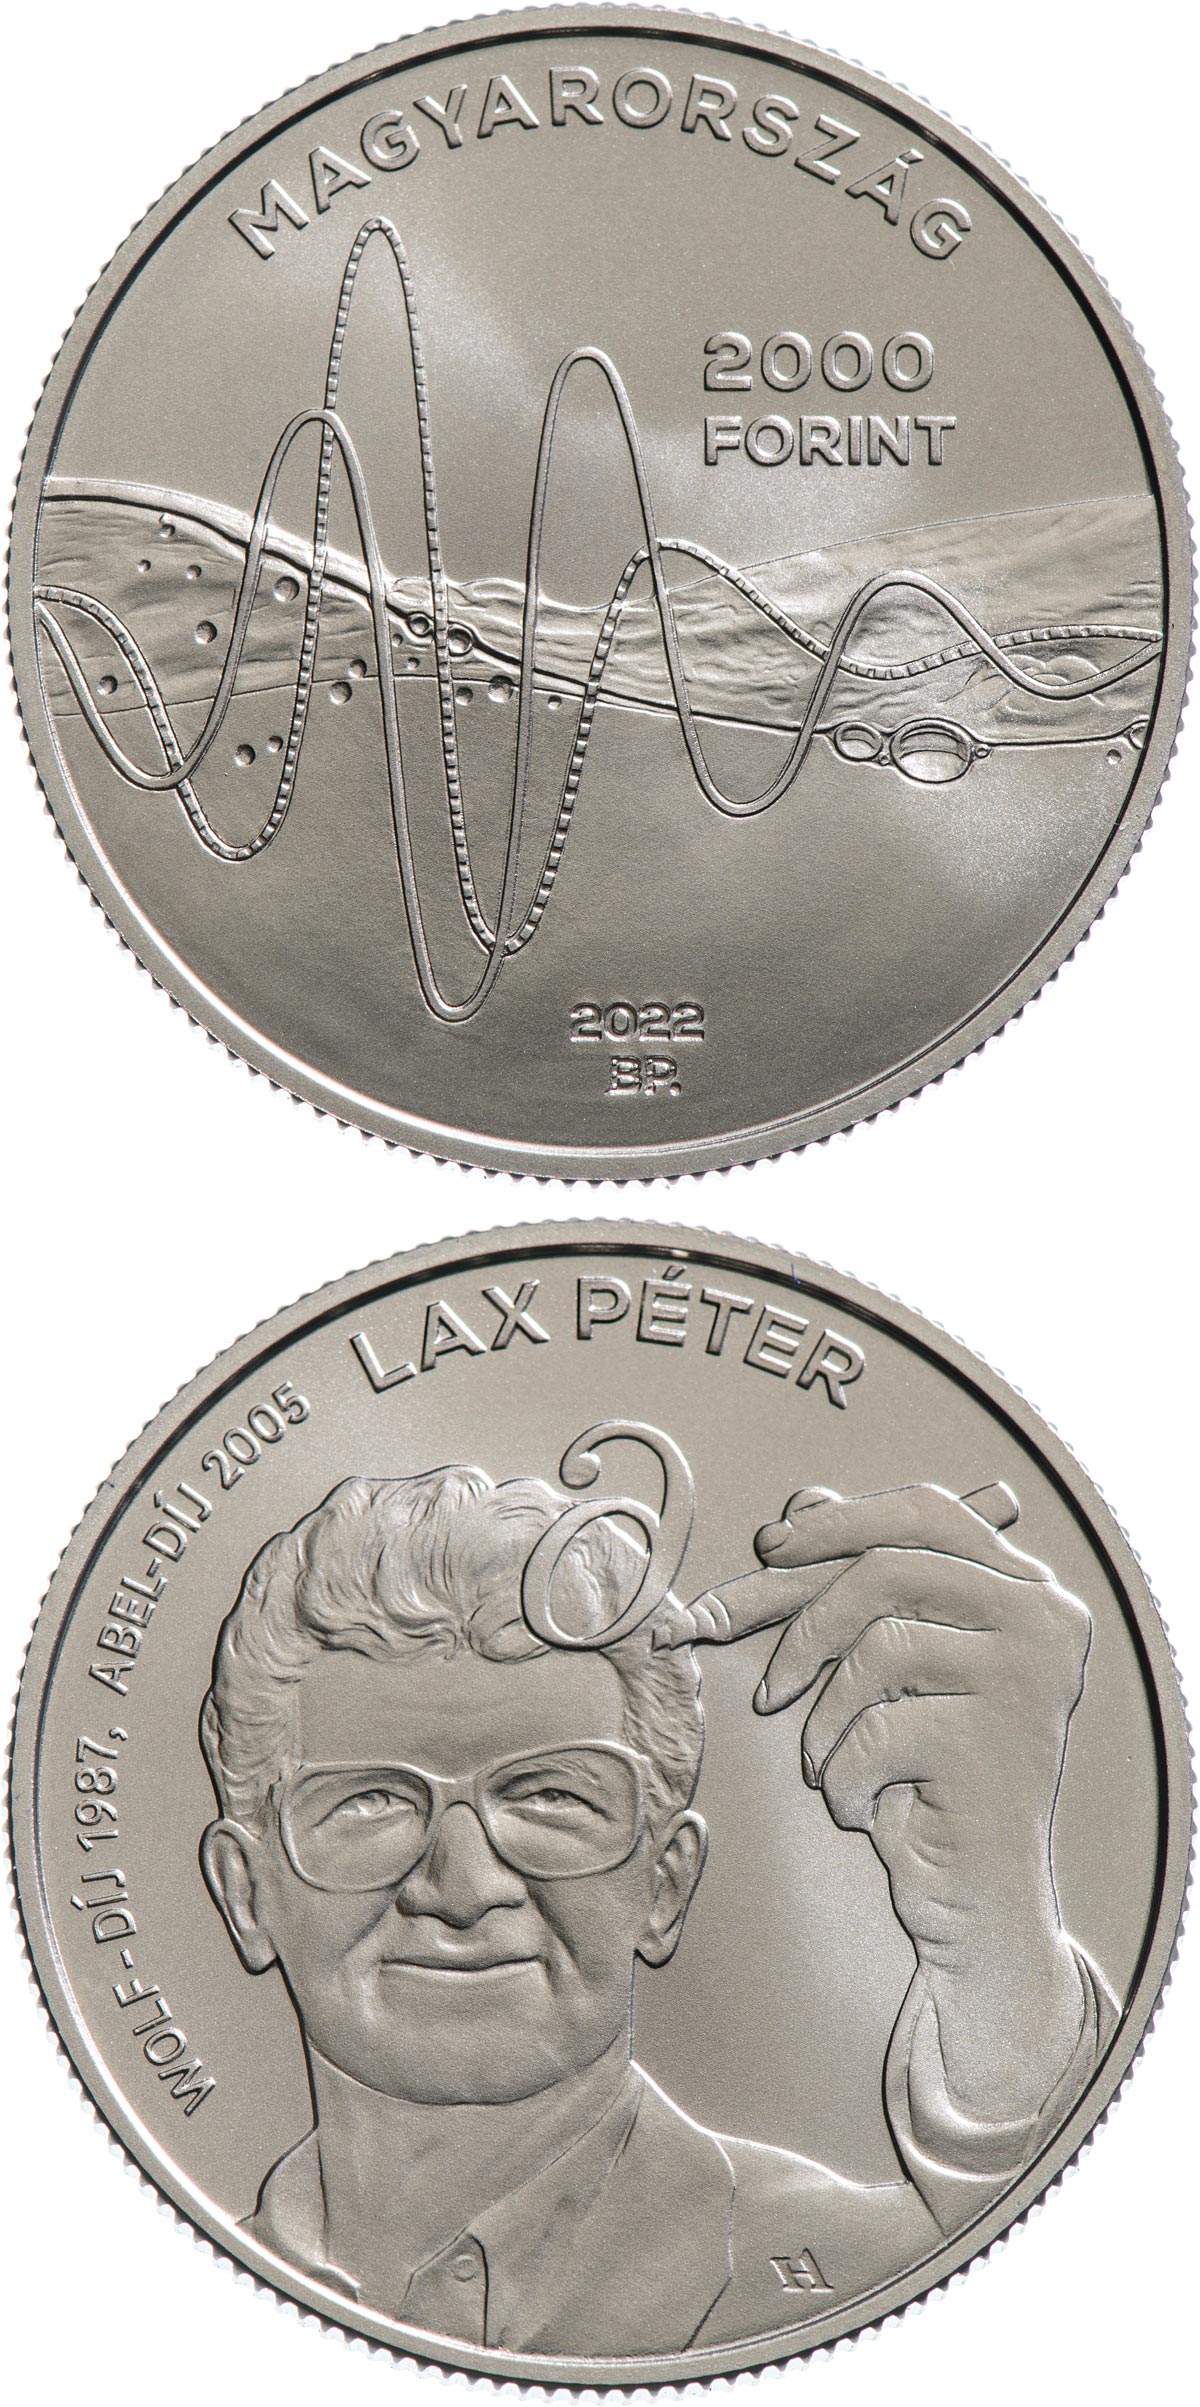 Image of 2000 forint coin - Péter Lax | Hungary 2022.  The Copper–Nickel (CuNi) coin is of BU quality.